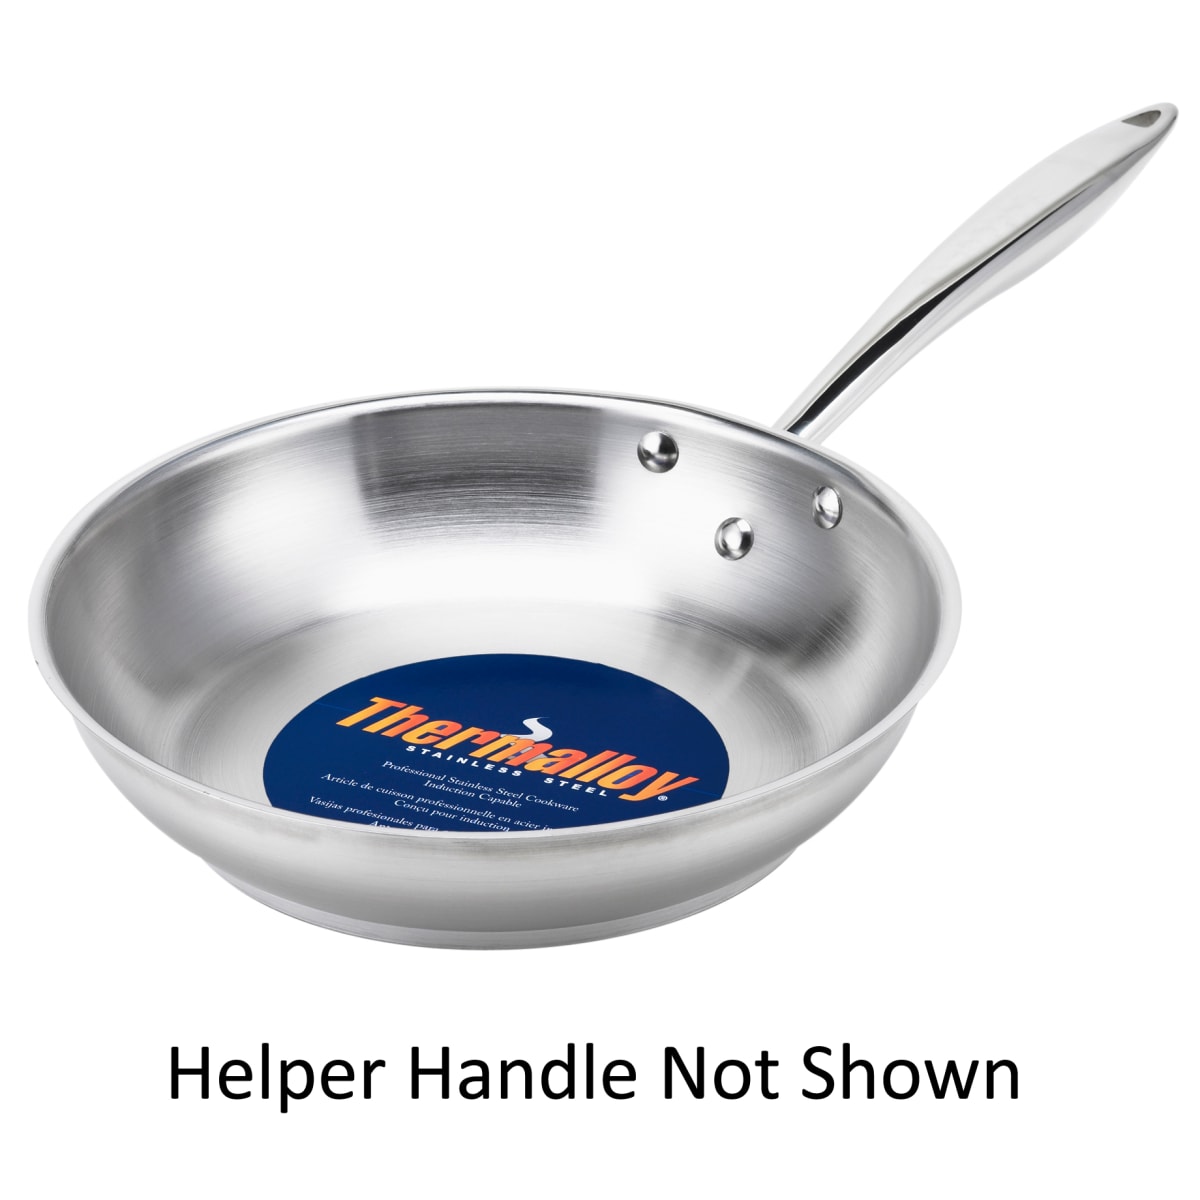 Want To Cook Safe And Hygienic Food? Trust Cookware Made With Stainless  Steel For Best Result